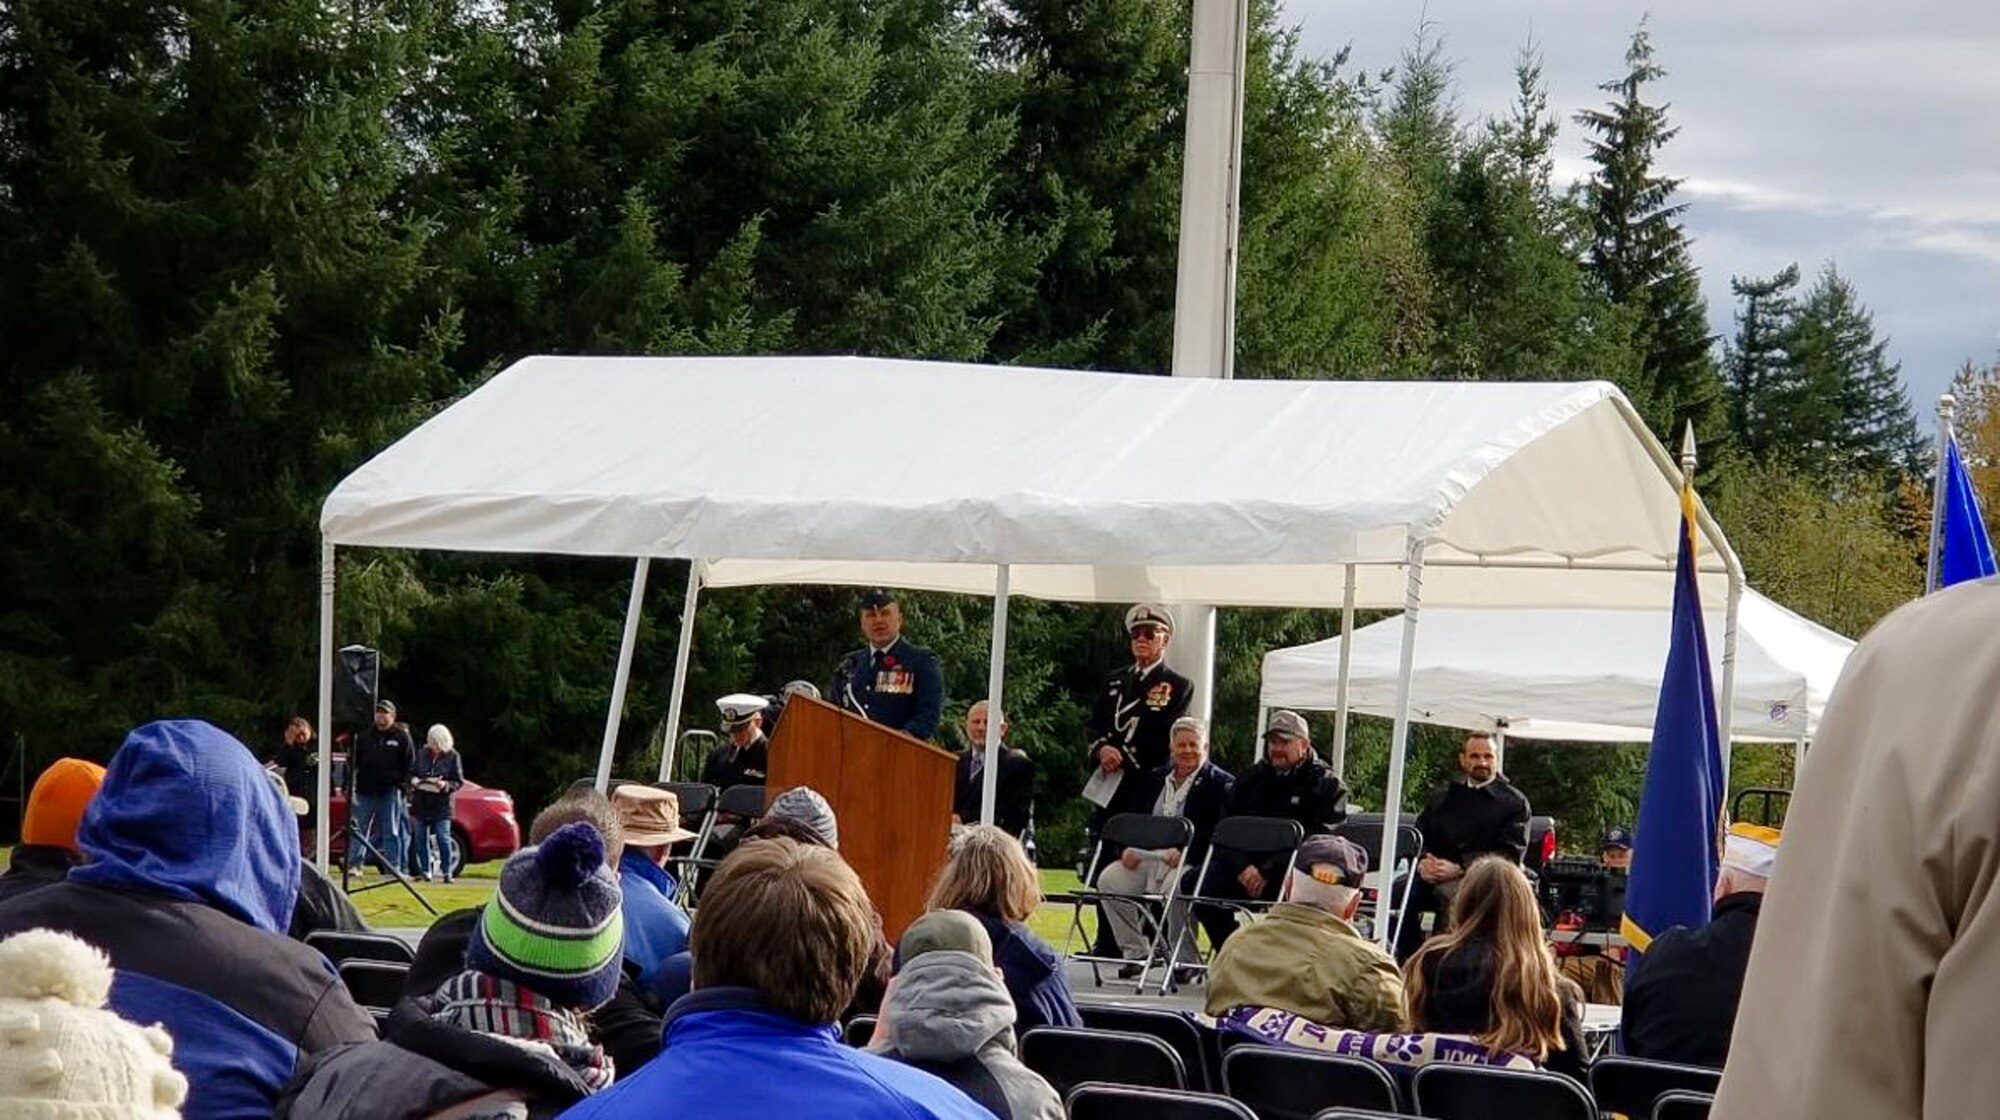 Lt. Col. Matthew Wappler, WADS Canadian Detachment commander, speaks about the Canadian effort during the Korean War and the significance of the poppy flower during the Veterans Day program at Tahoma National Cemetery.